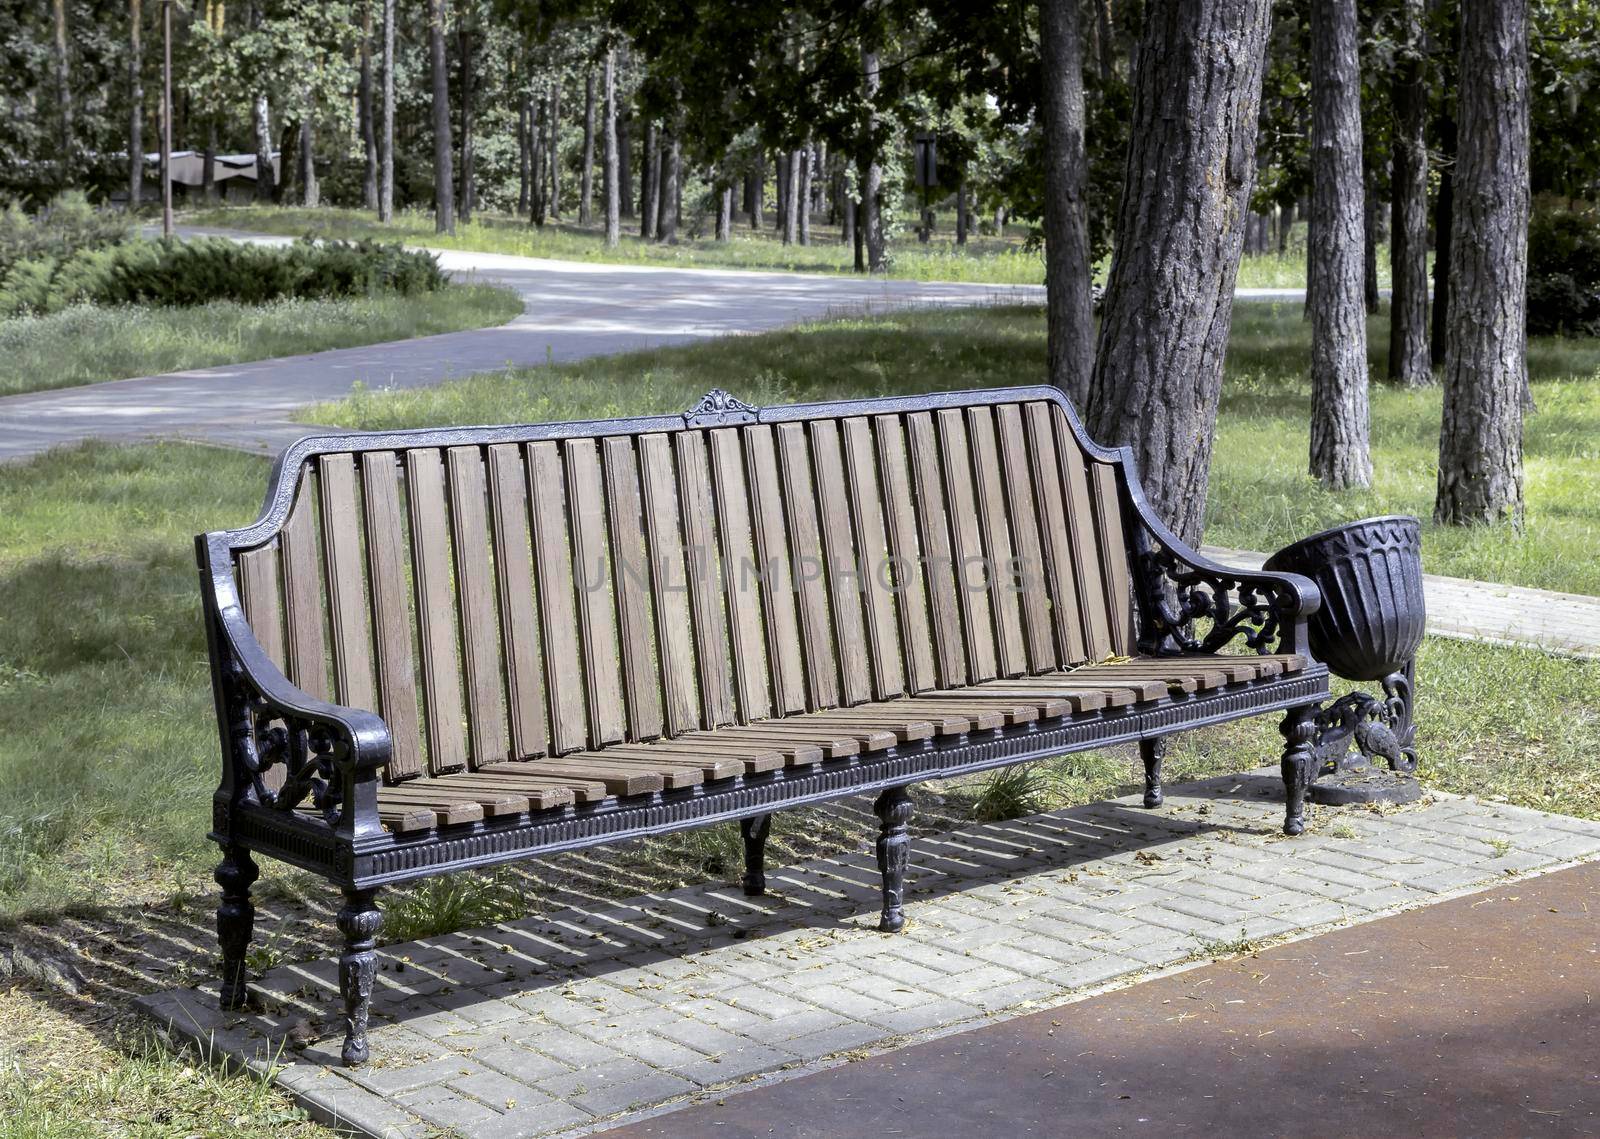 Wooden bench for relaxing in the park by georgina198